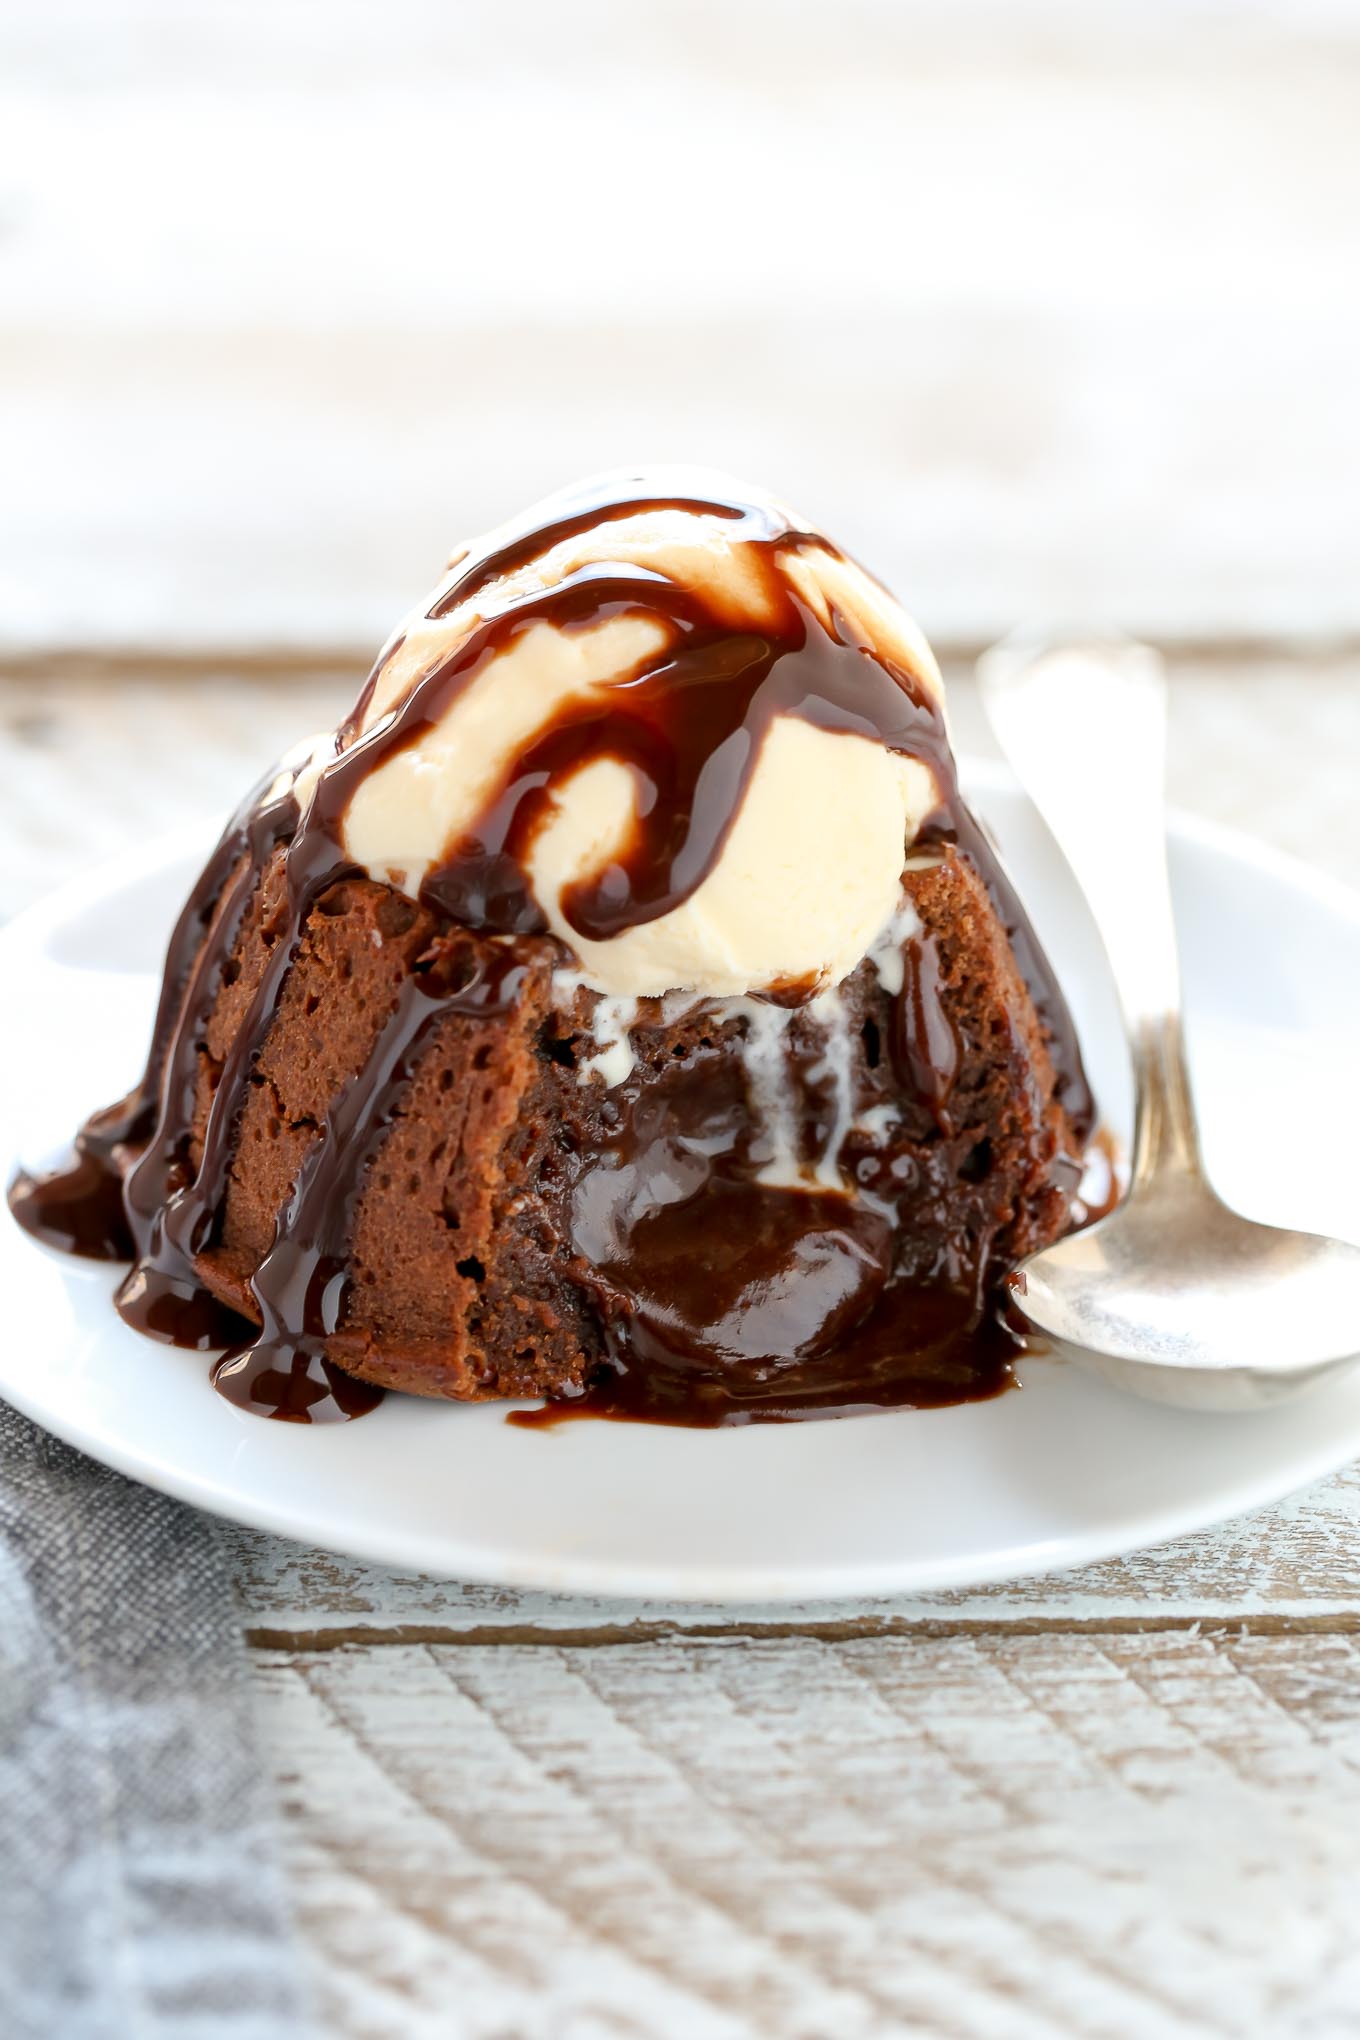 A molten chocolate cake topped with ice cream and chocolate sauce on a white plate. The cake has been cut into and the filling is oozing out. 